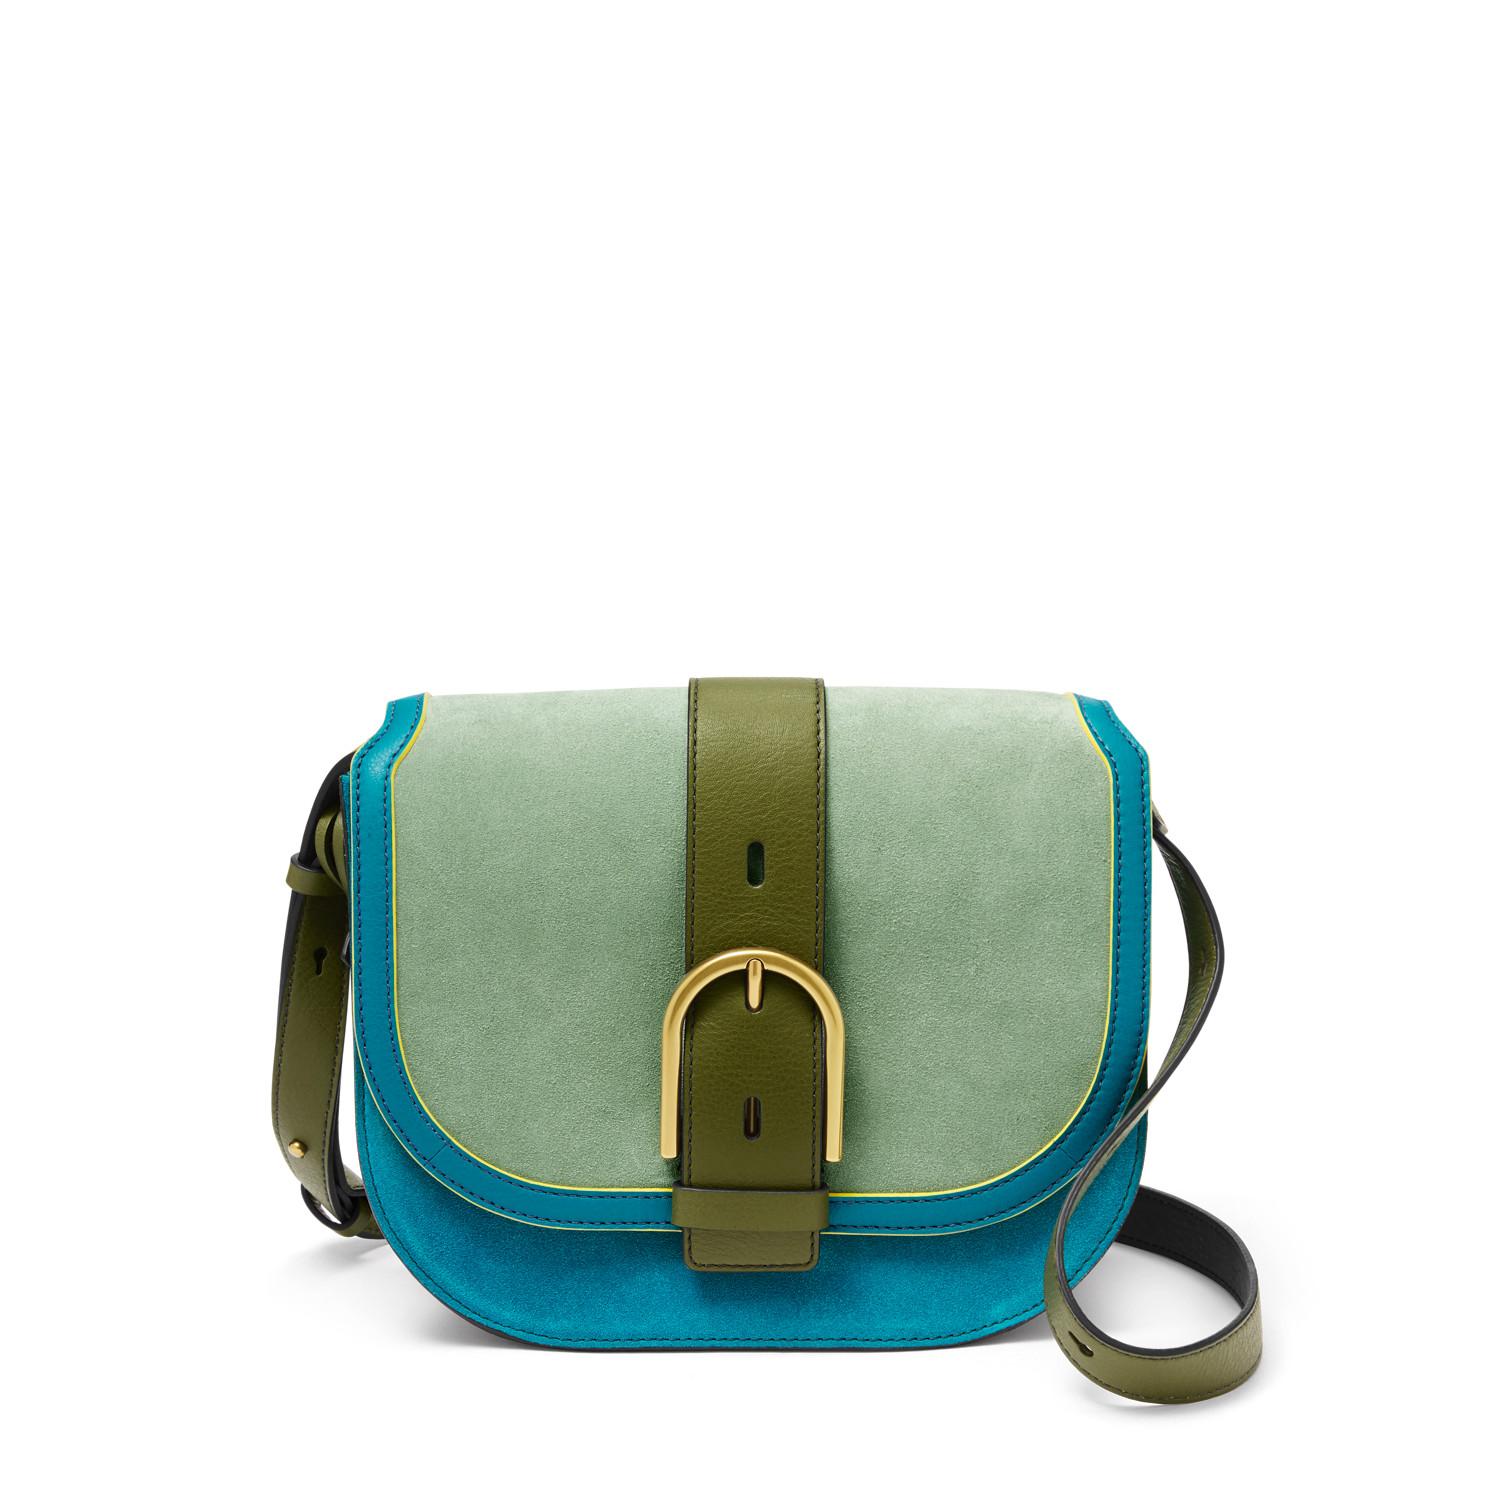 Fossil Suede Wiley Saddle Bag in Blue - Lyst